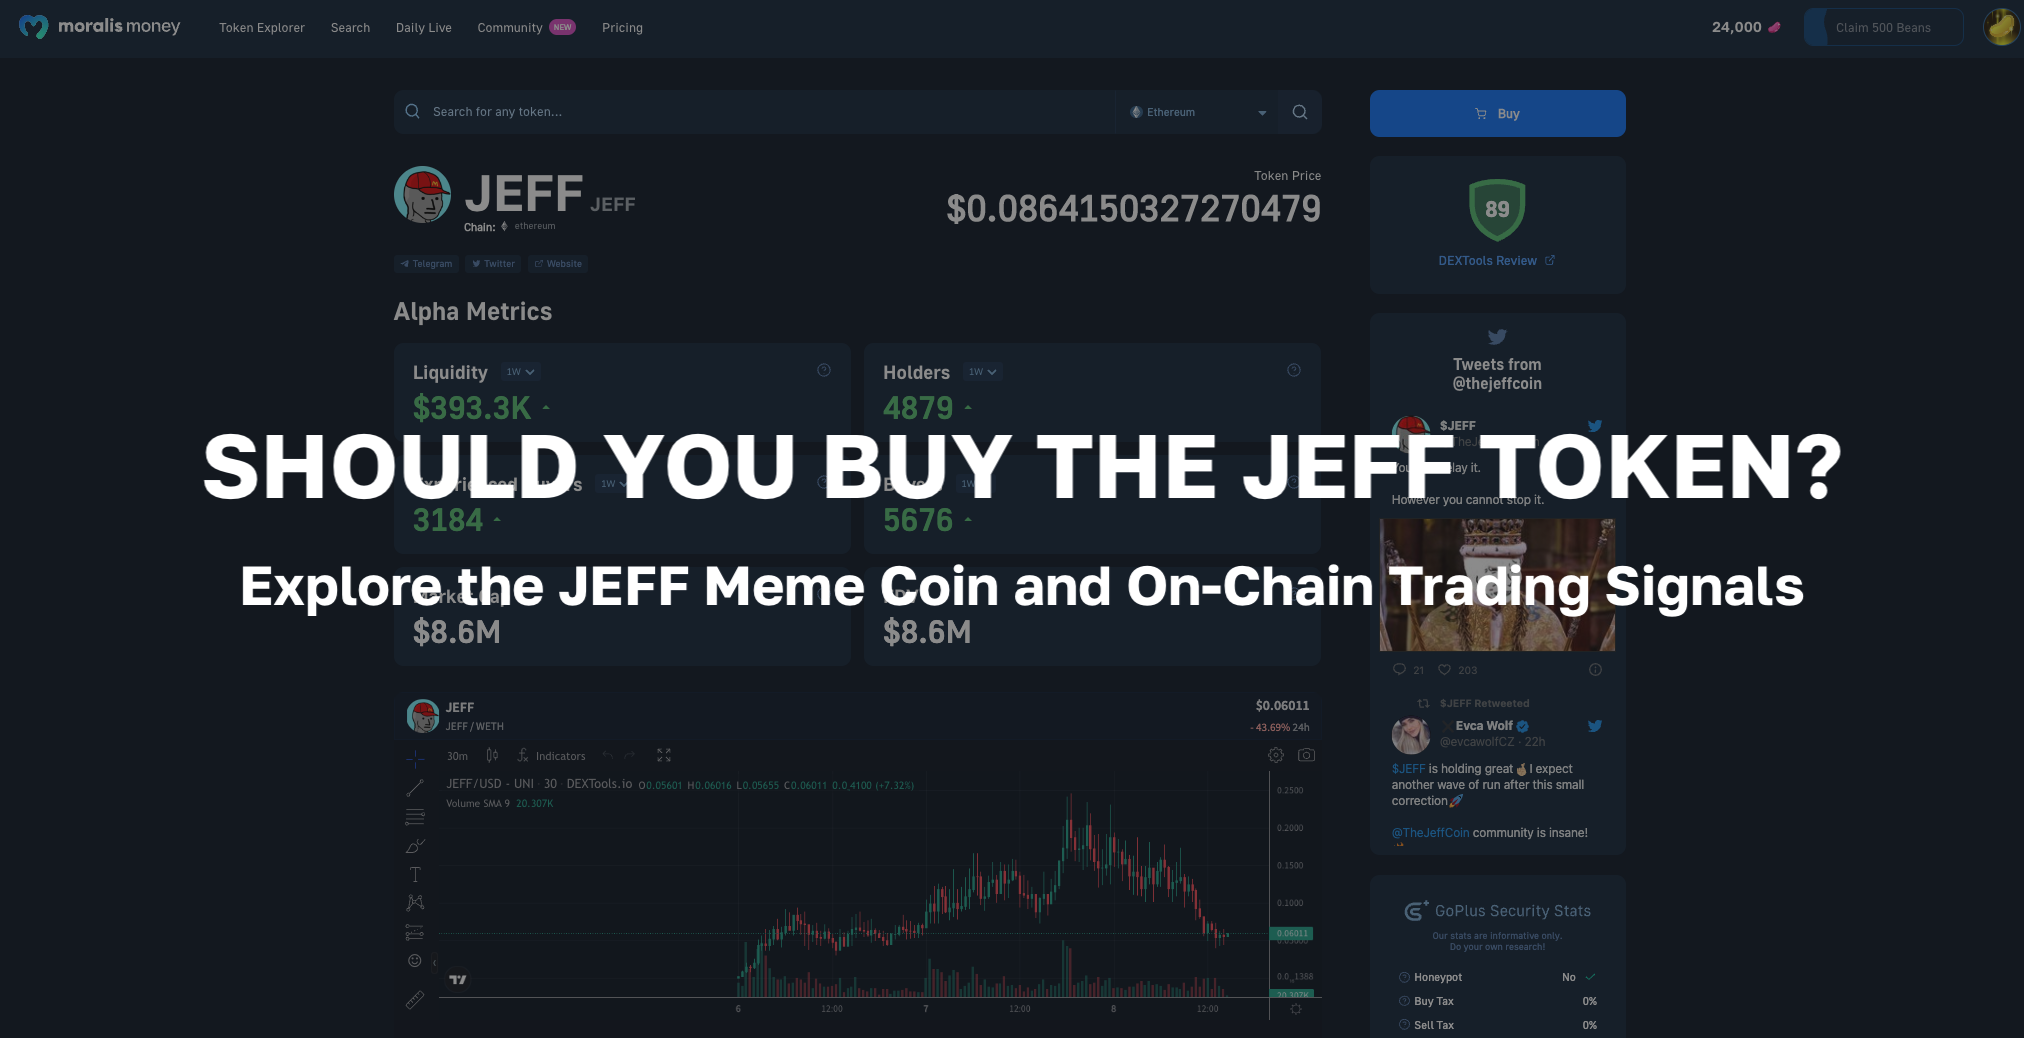 Explore the JEFF Meme Coin and if You Should Buy The JEFF Token